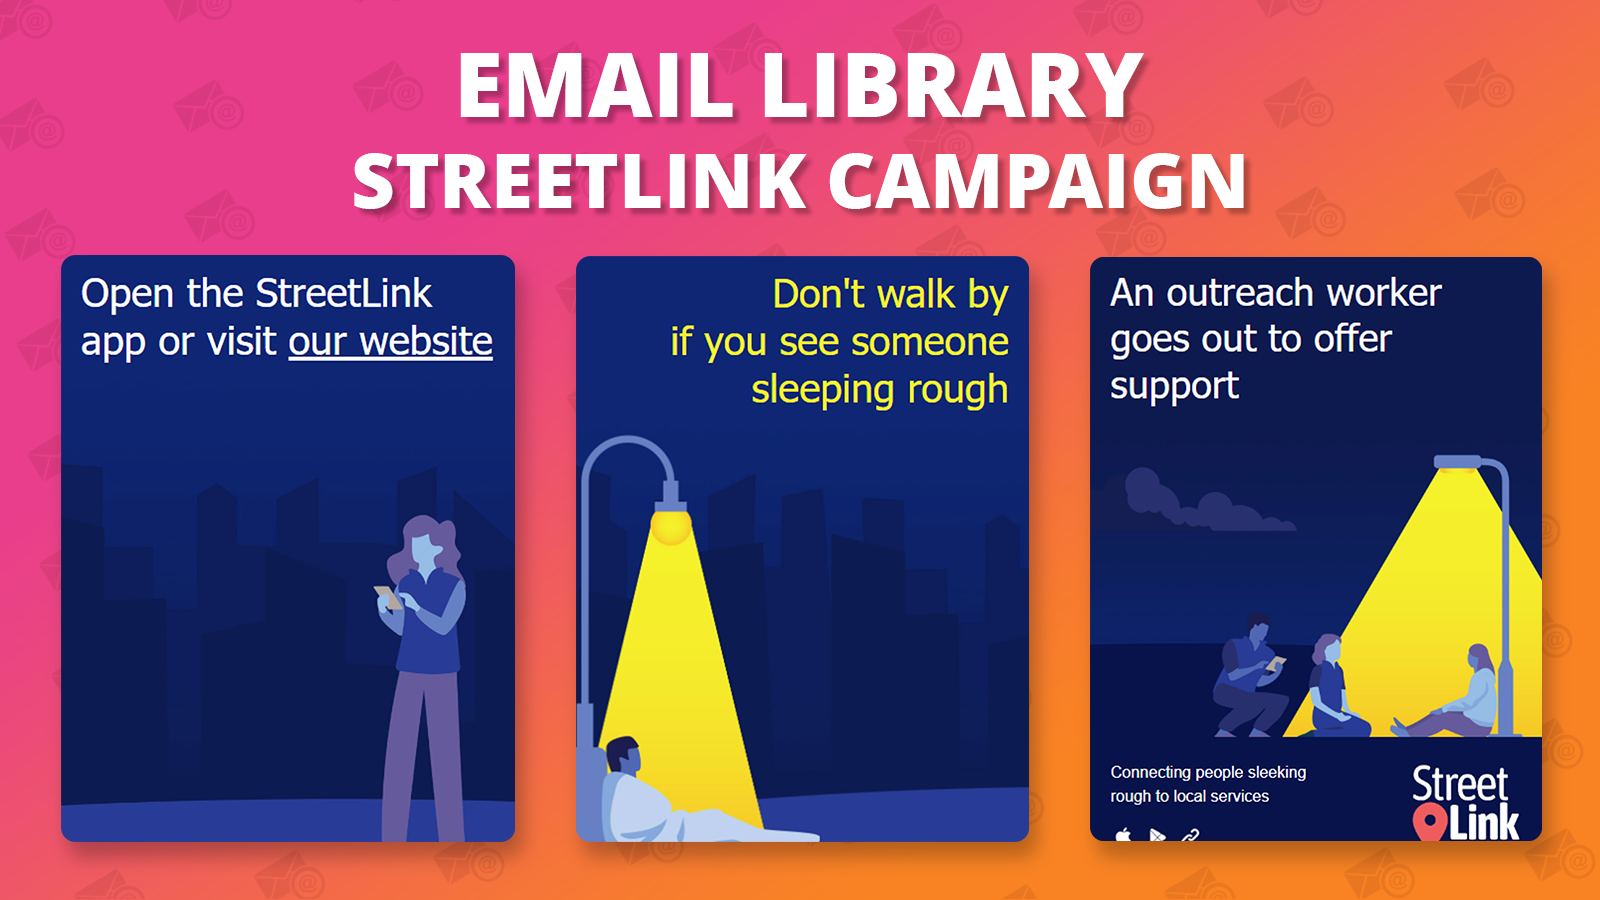 Email Library: StreetLink Campaign